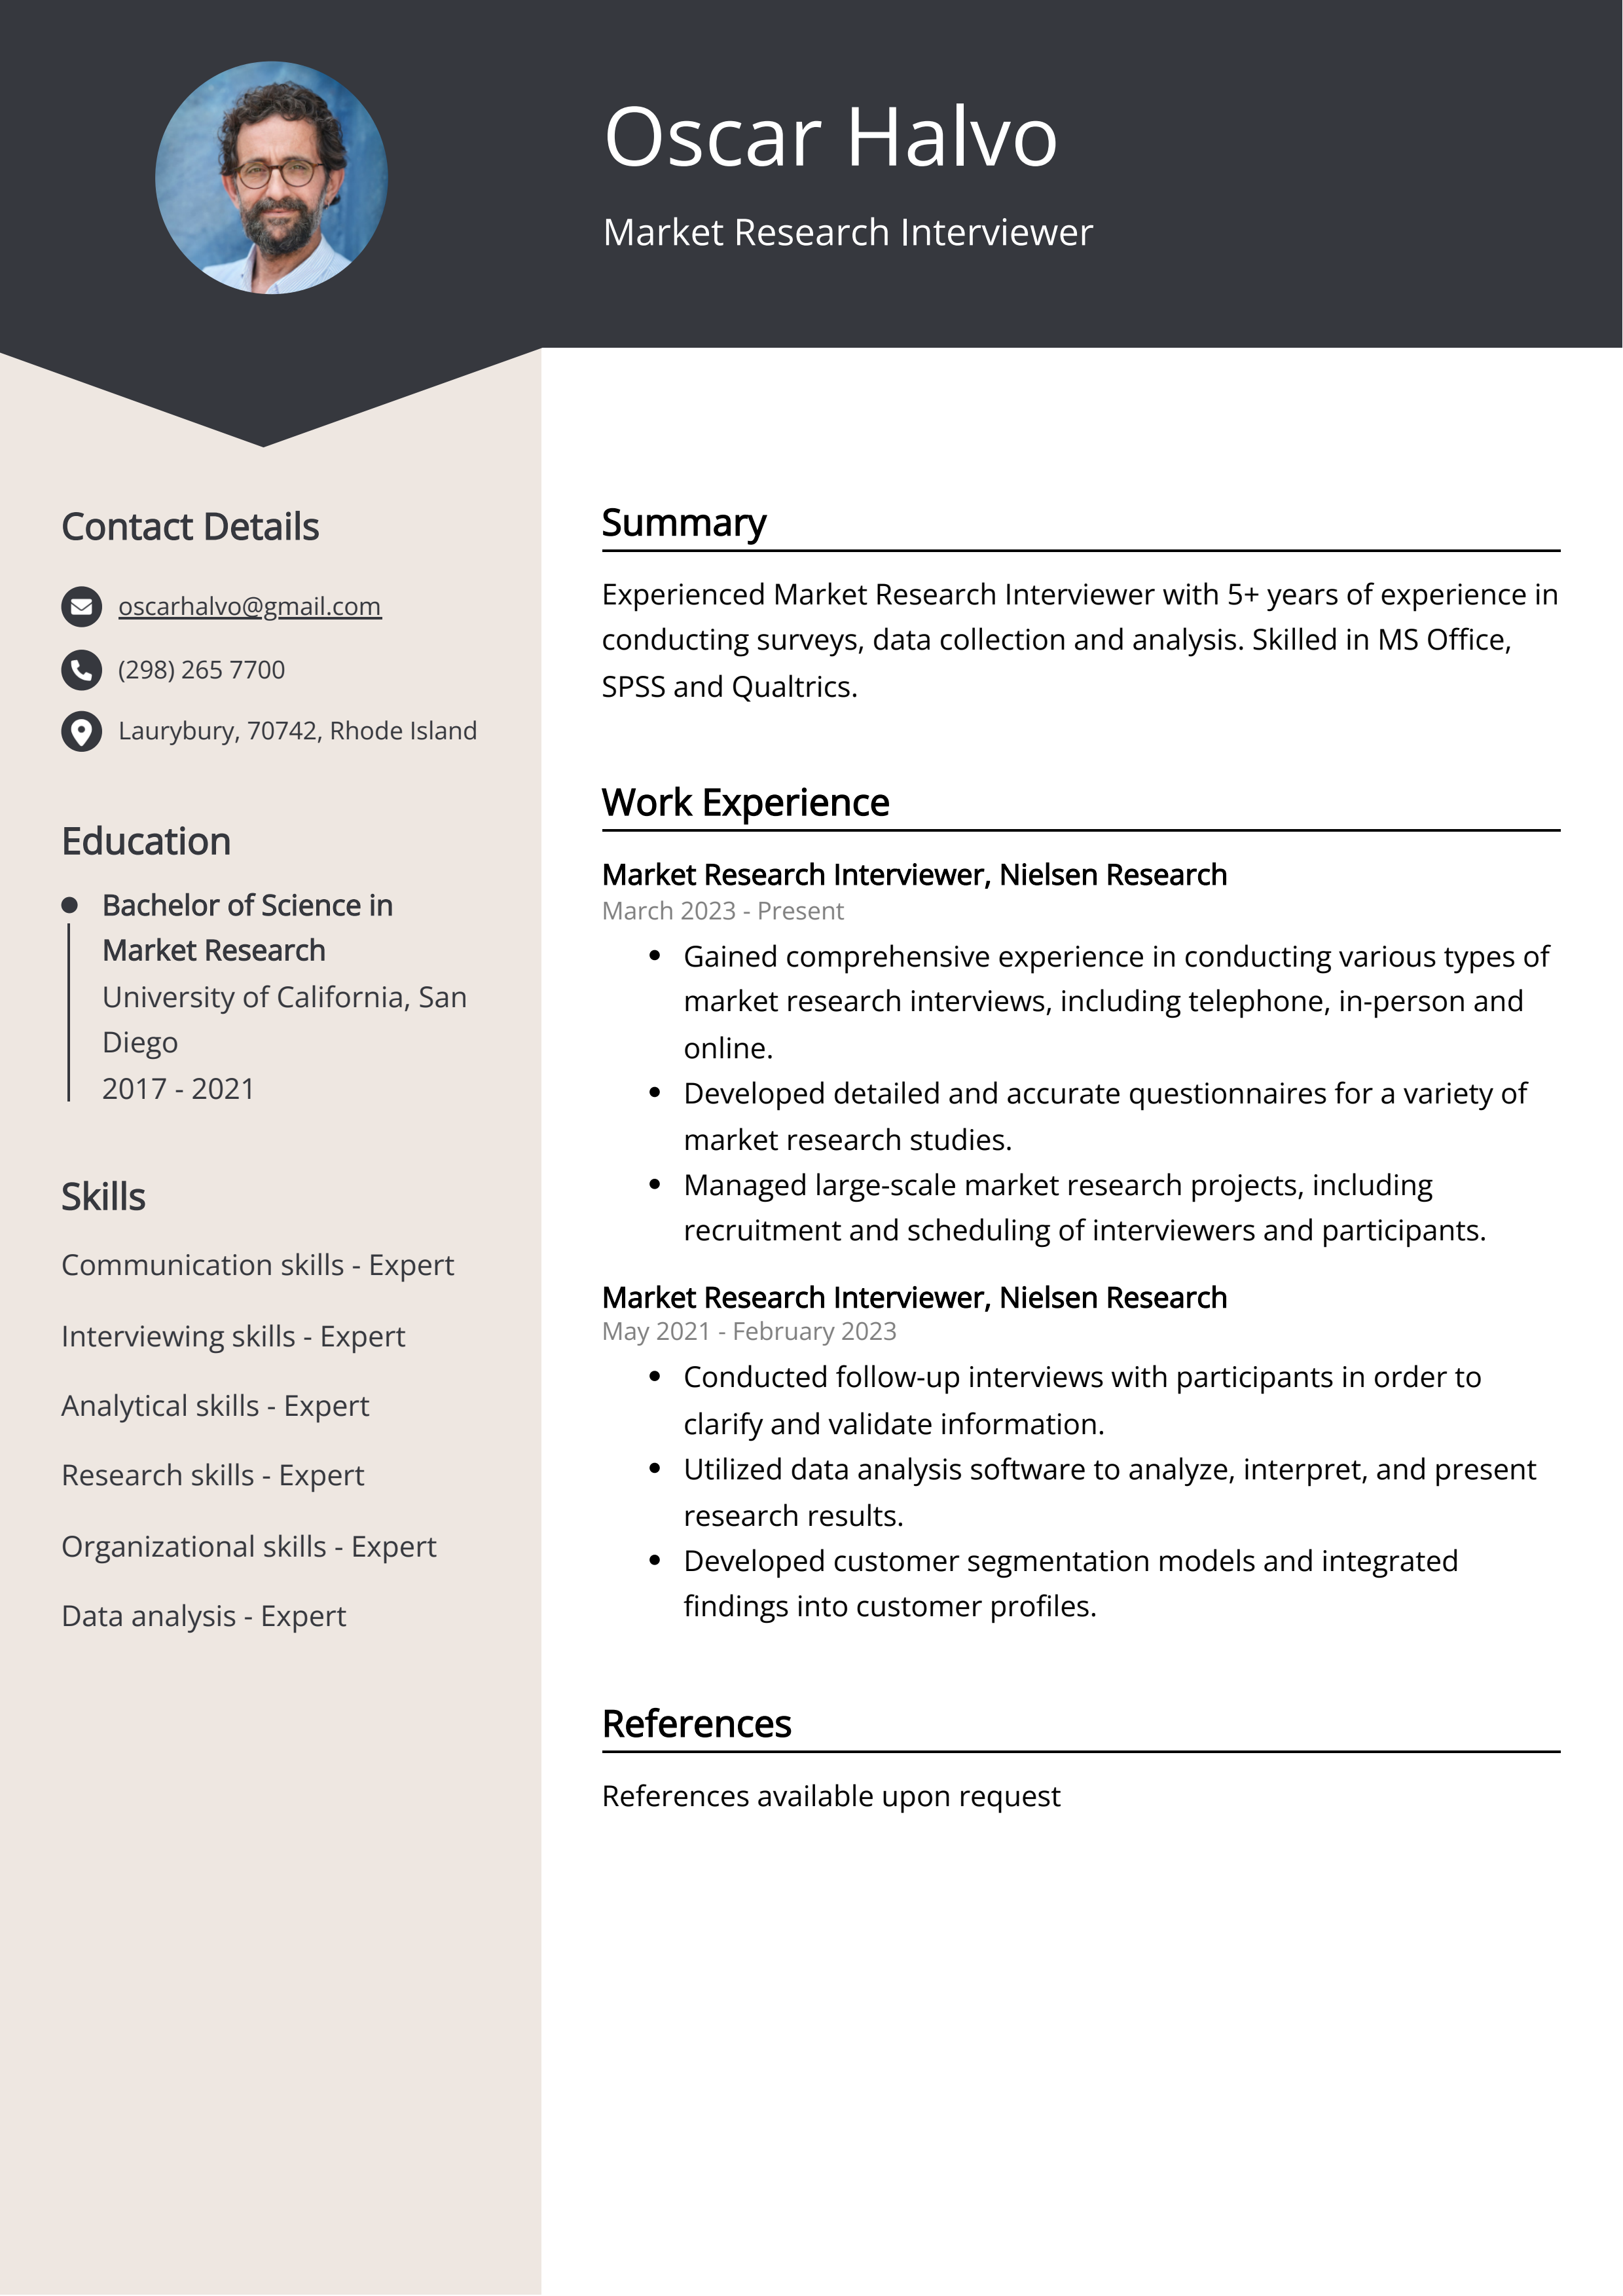 Market Research Interviewer Resume Example